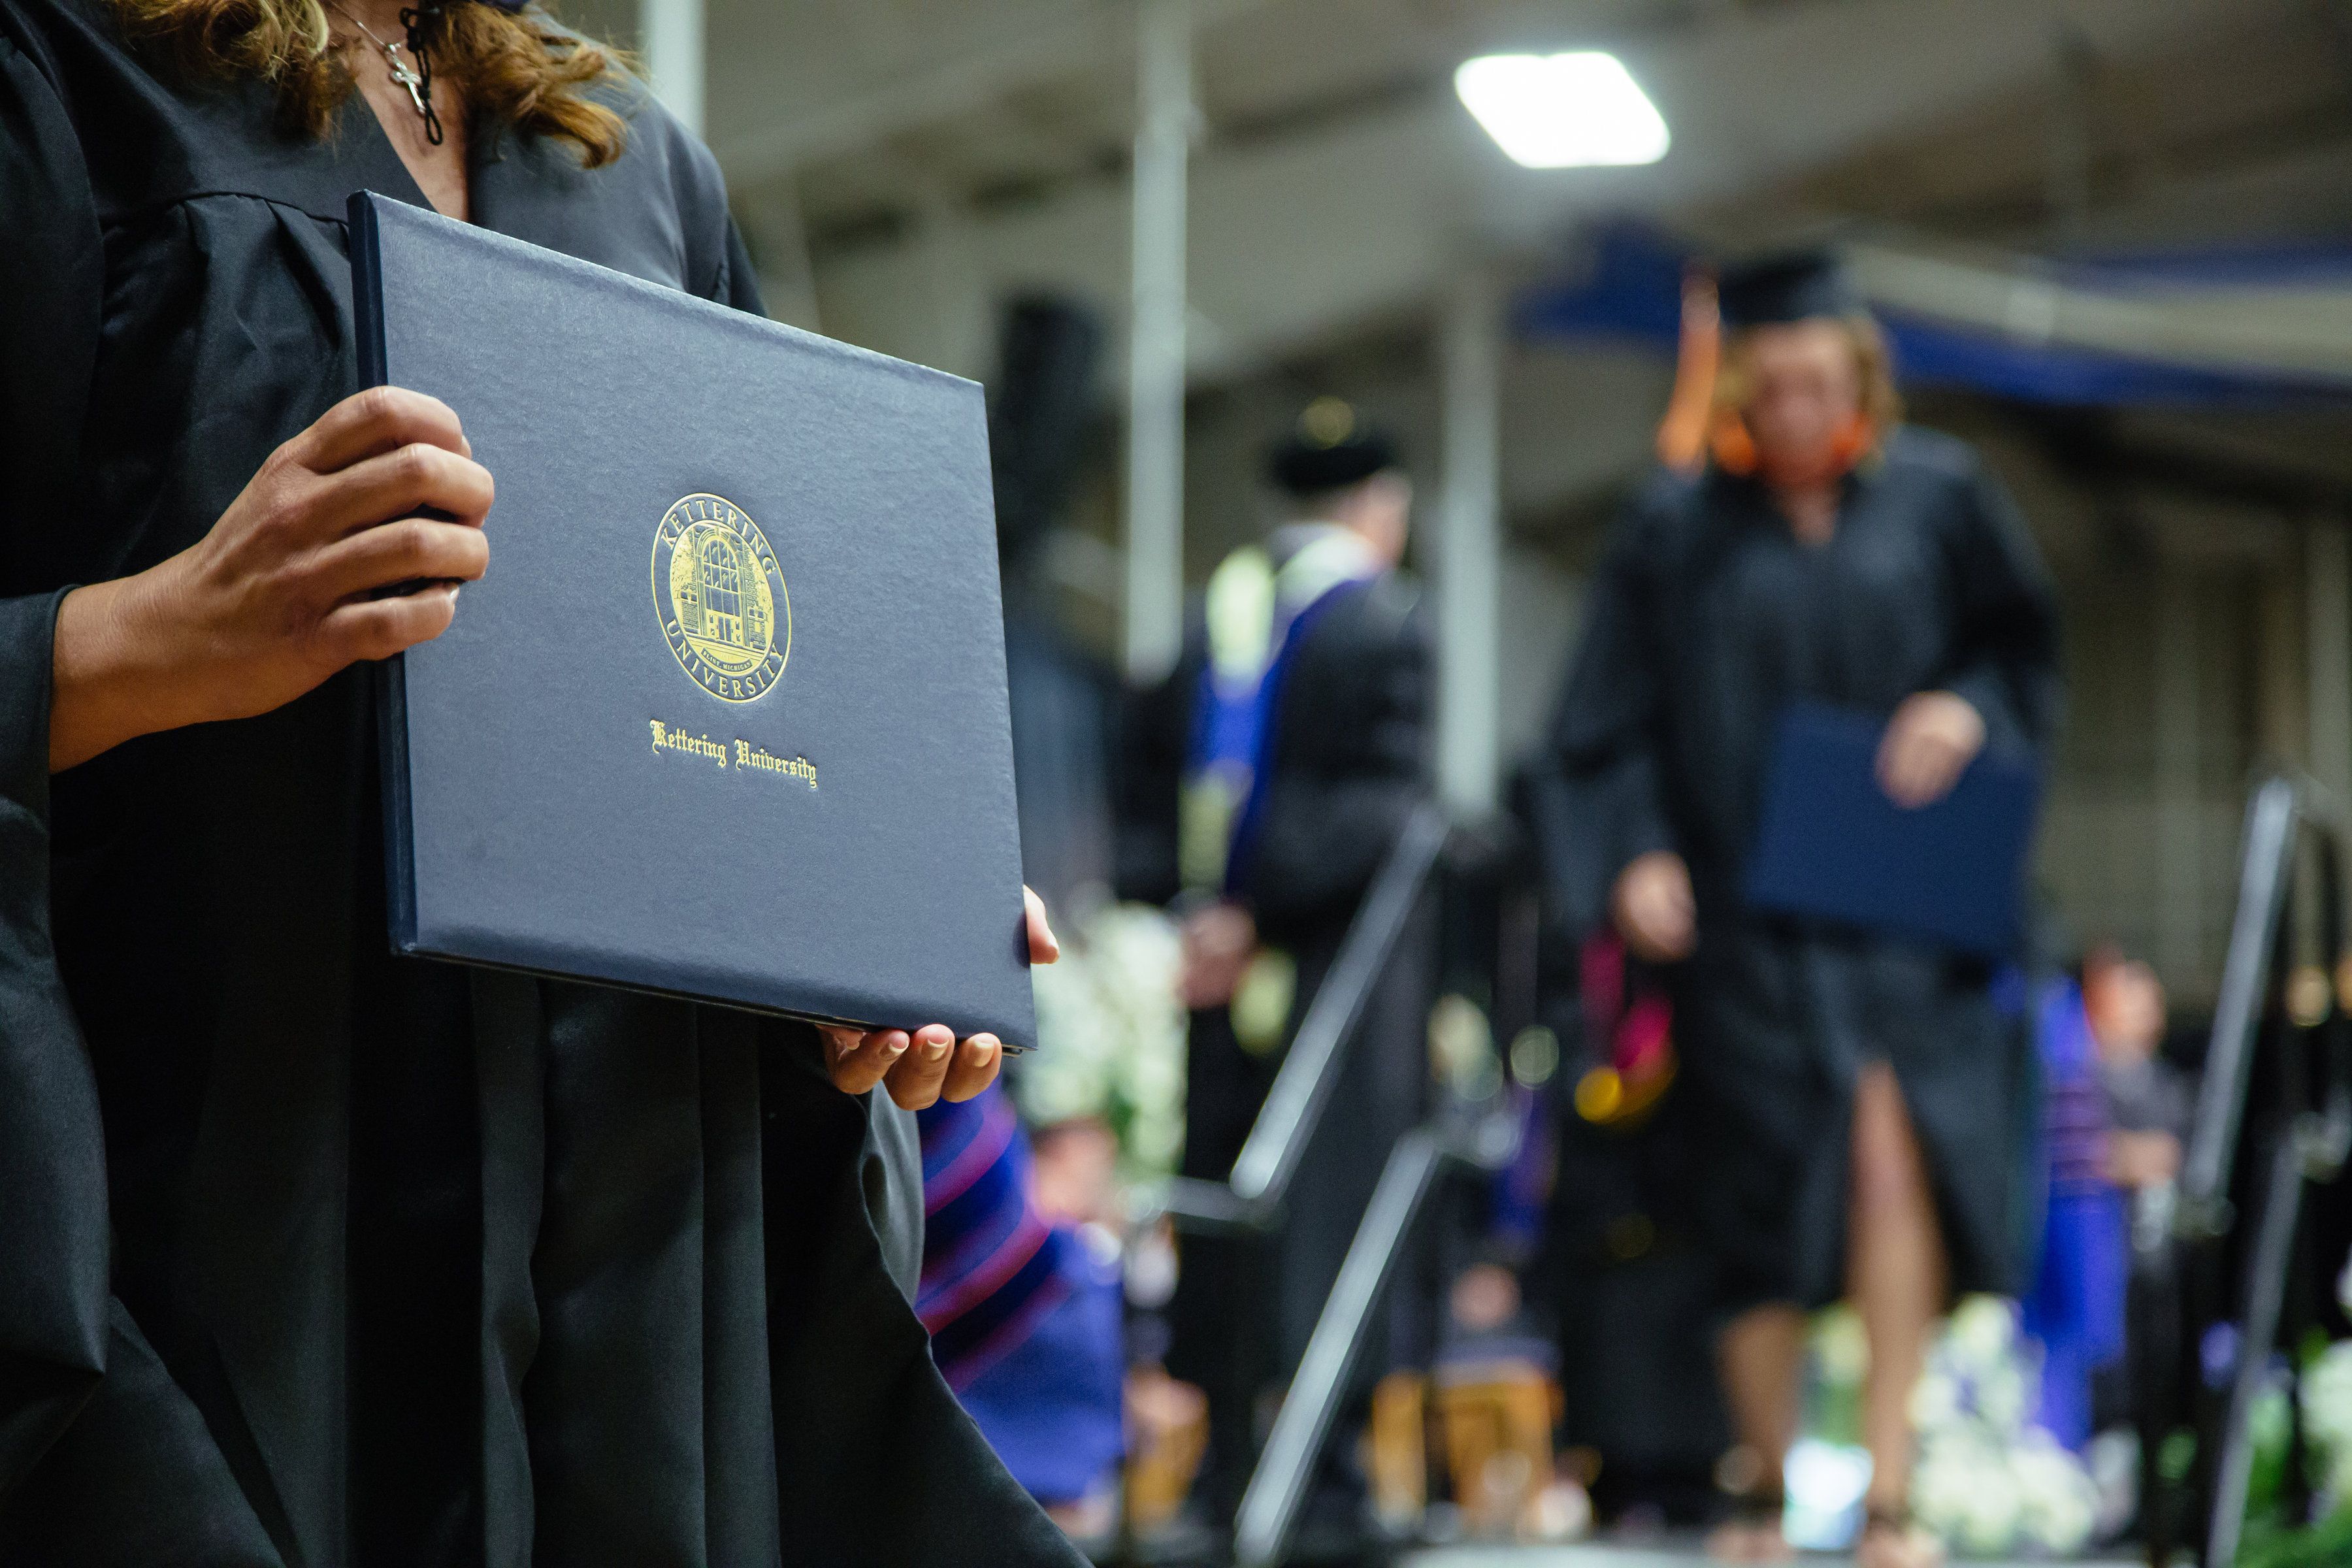 Kettering University Defies National Trend, Keeps Tuition at 201920 Levels